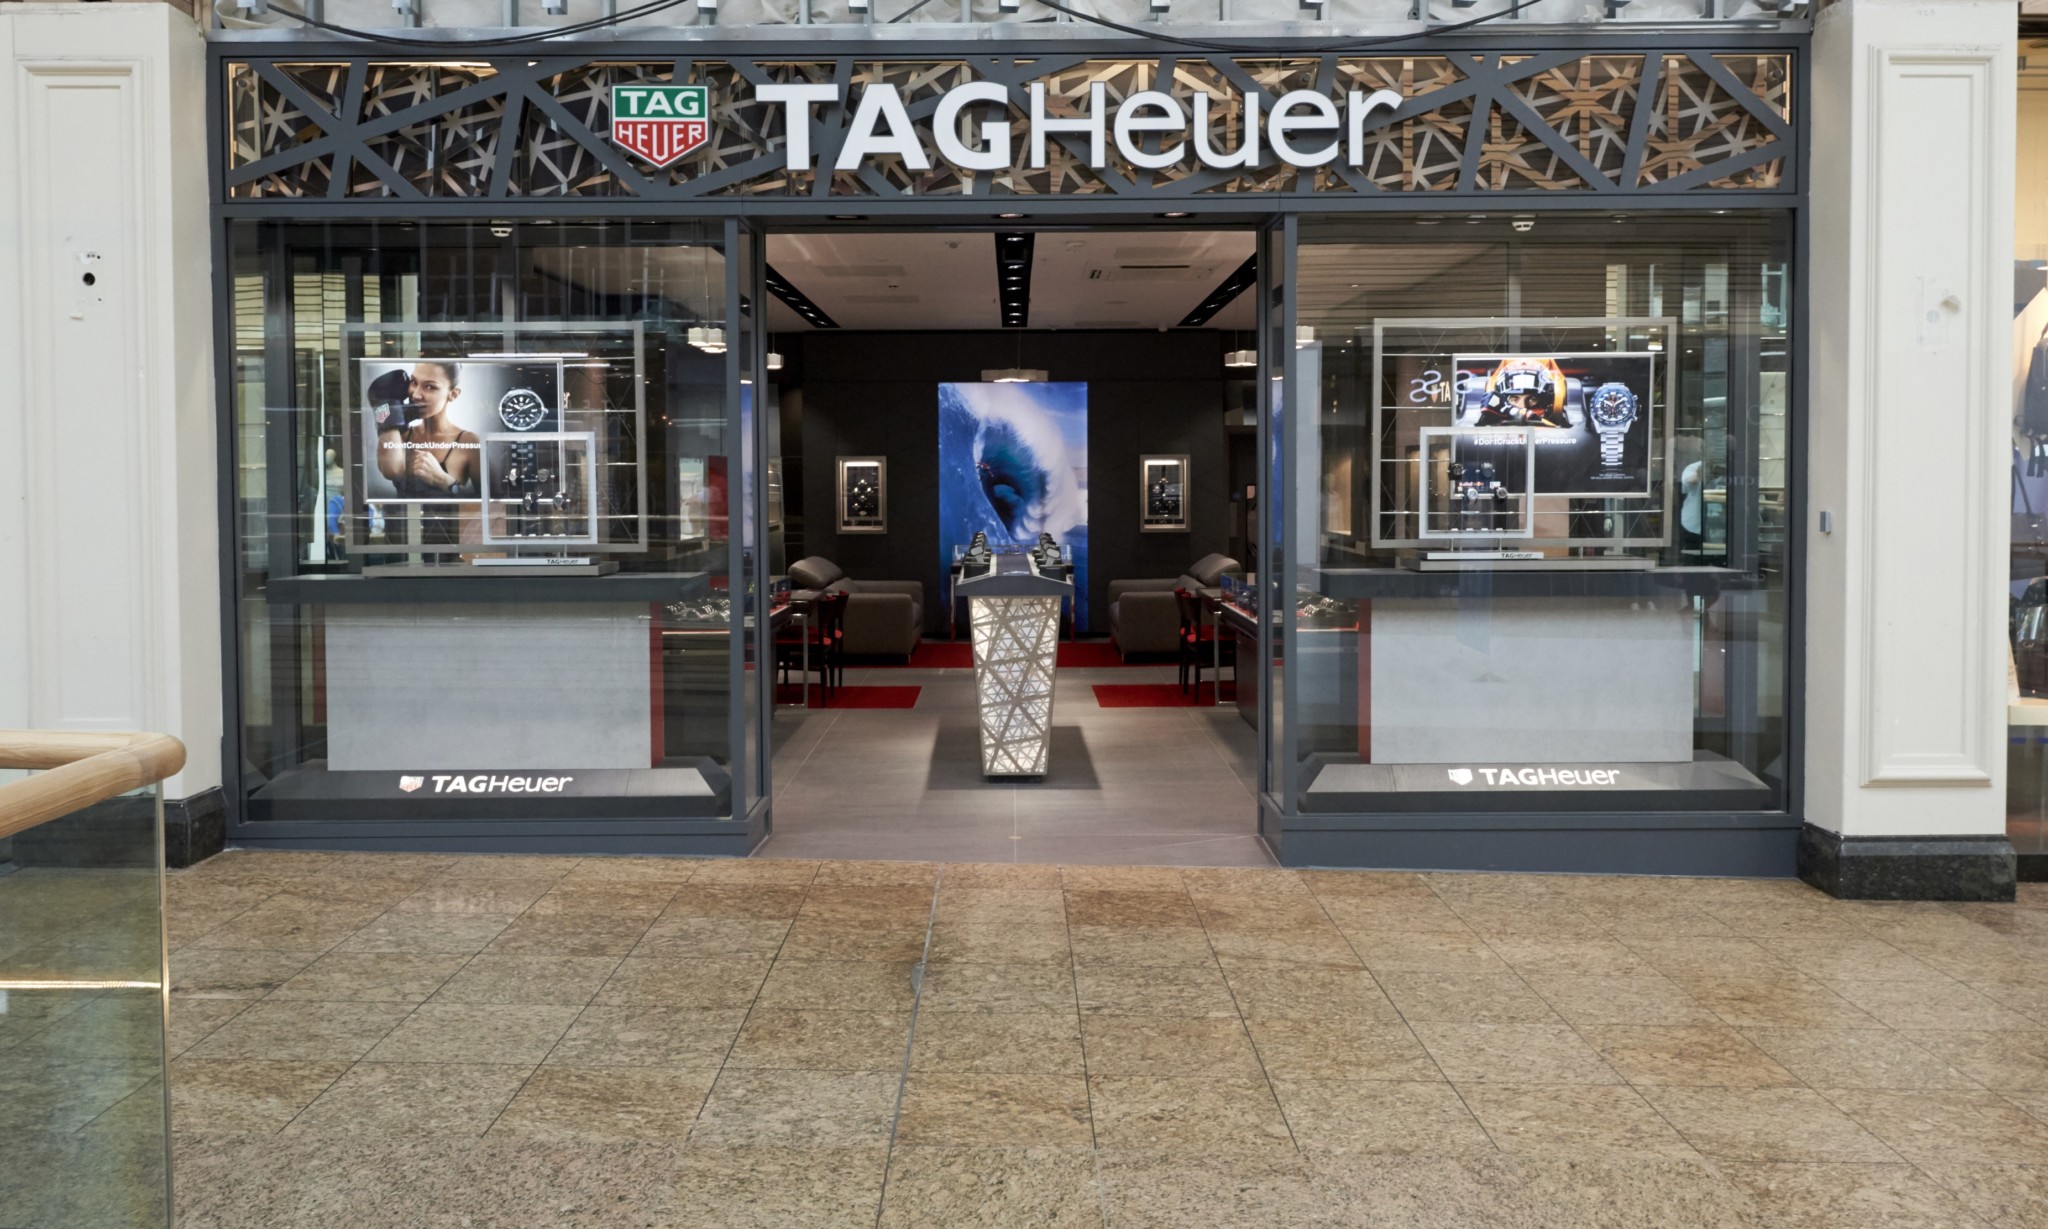 Tag heuer opens in meadowhall